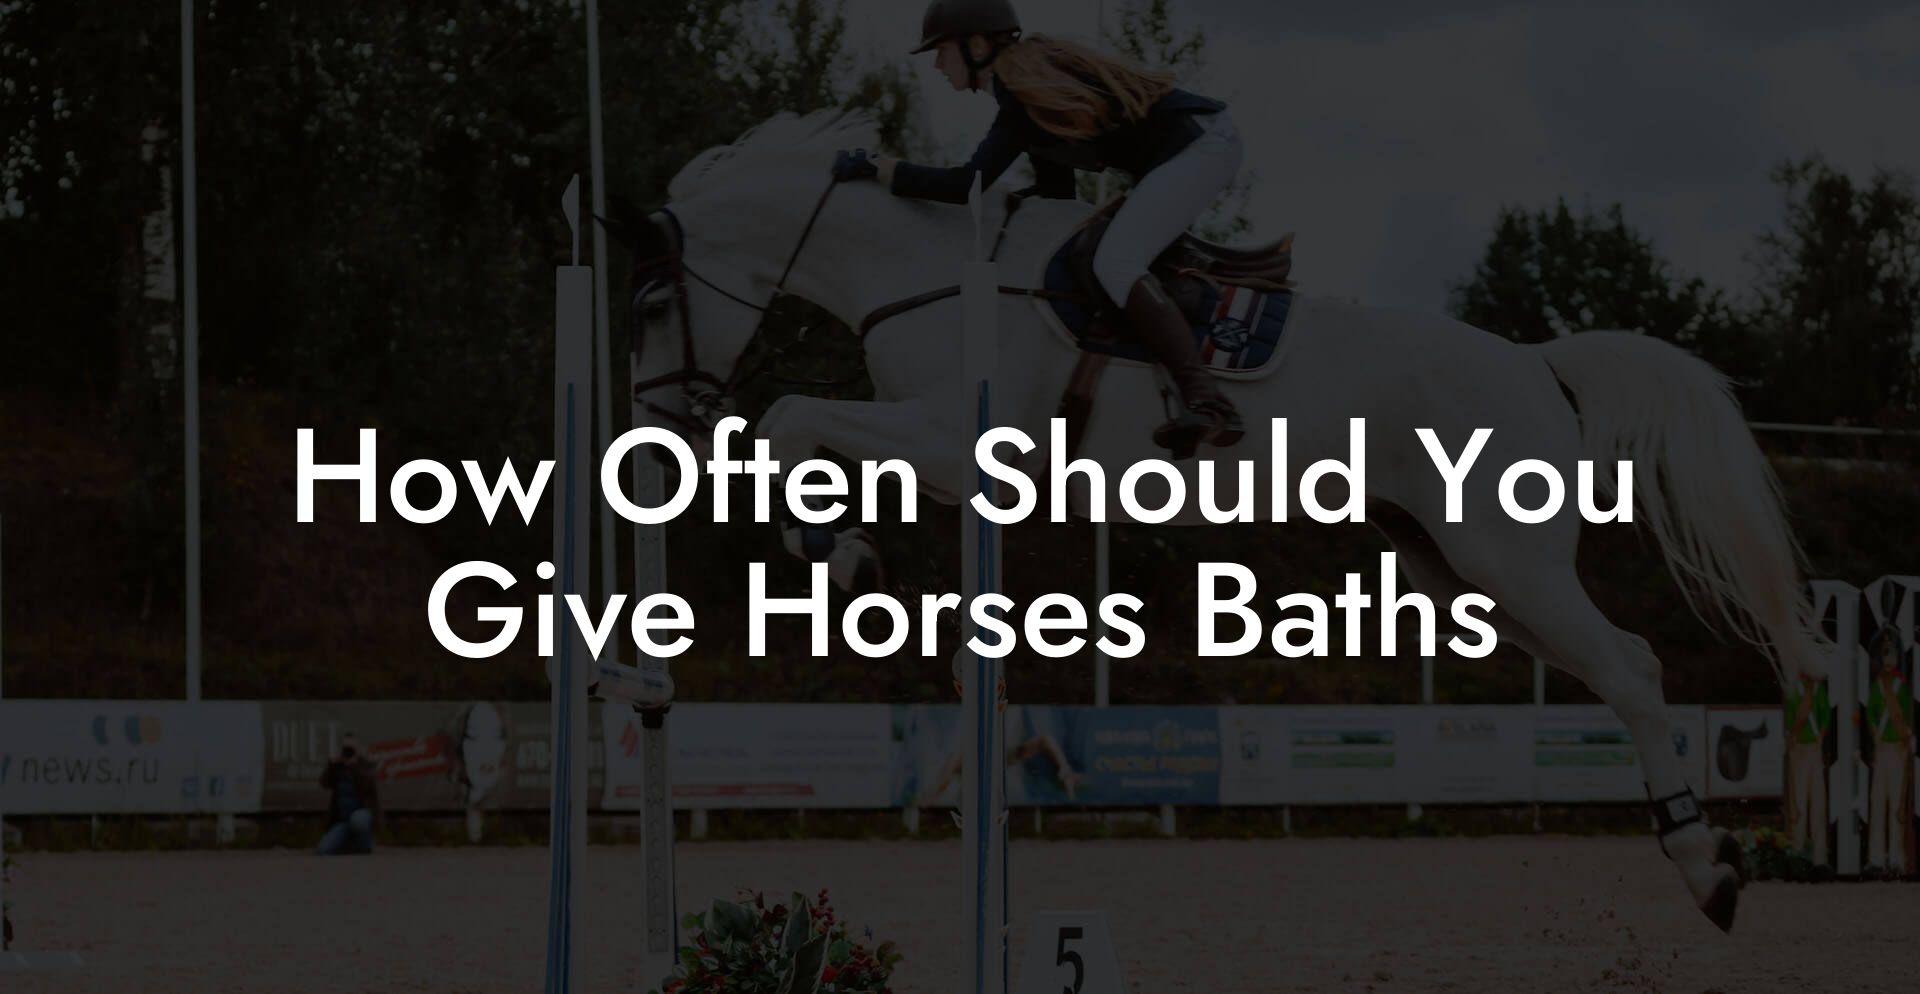 How Often Should You Give Horses Baths